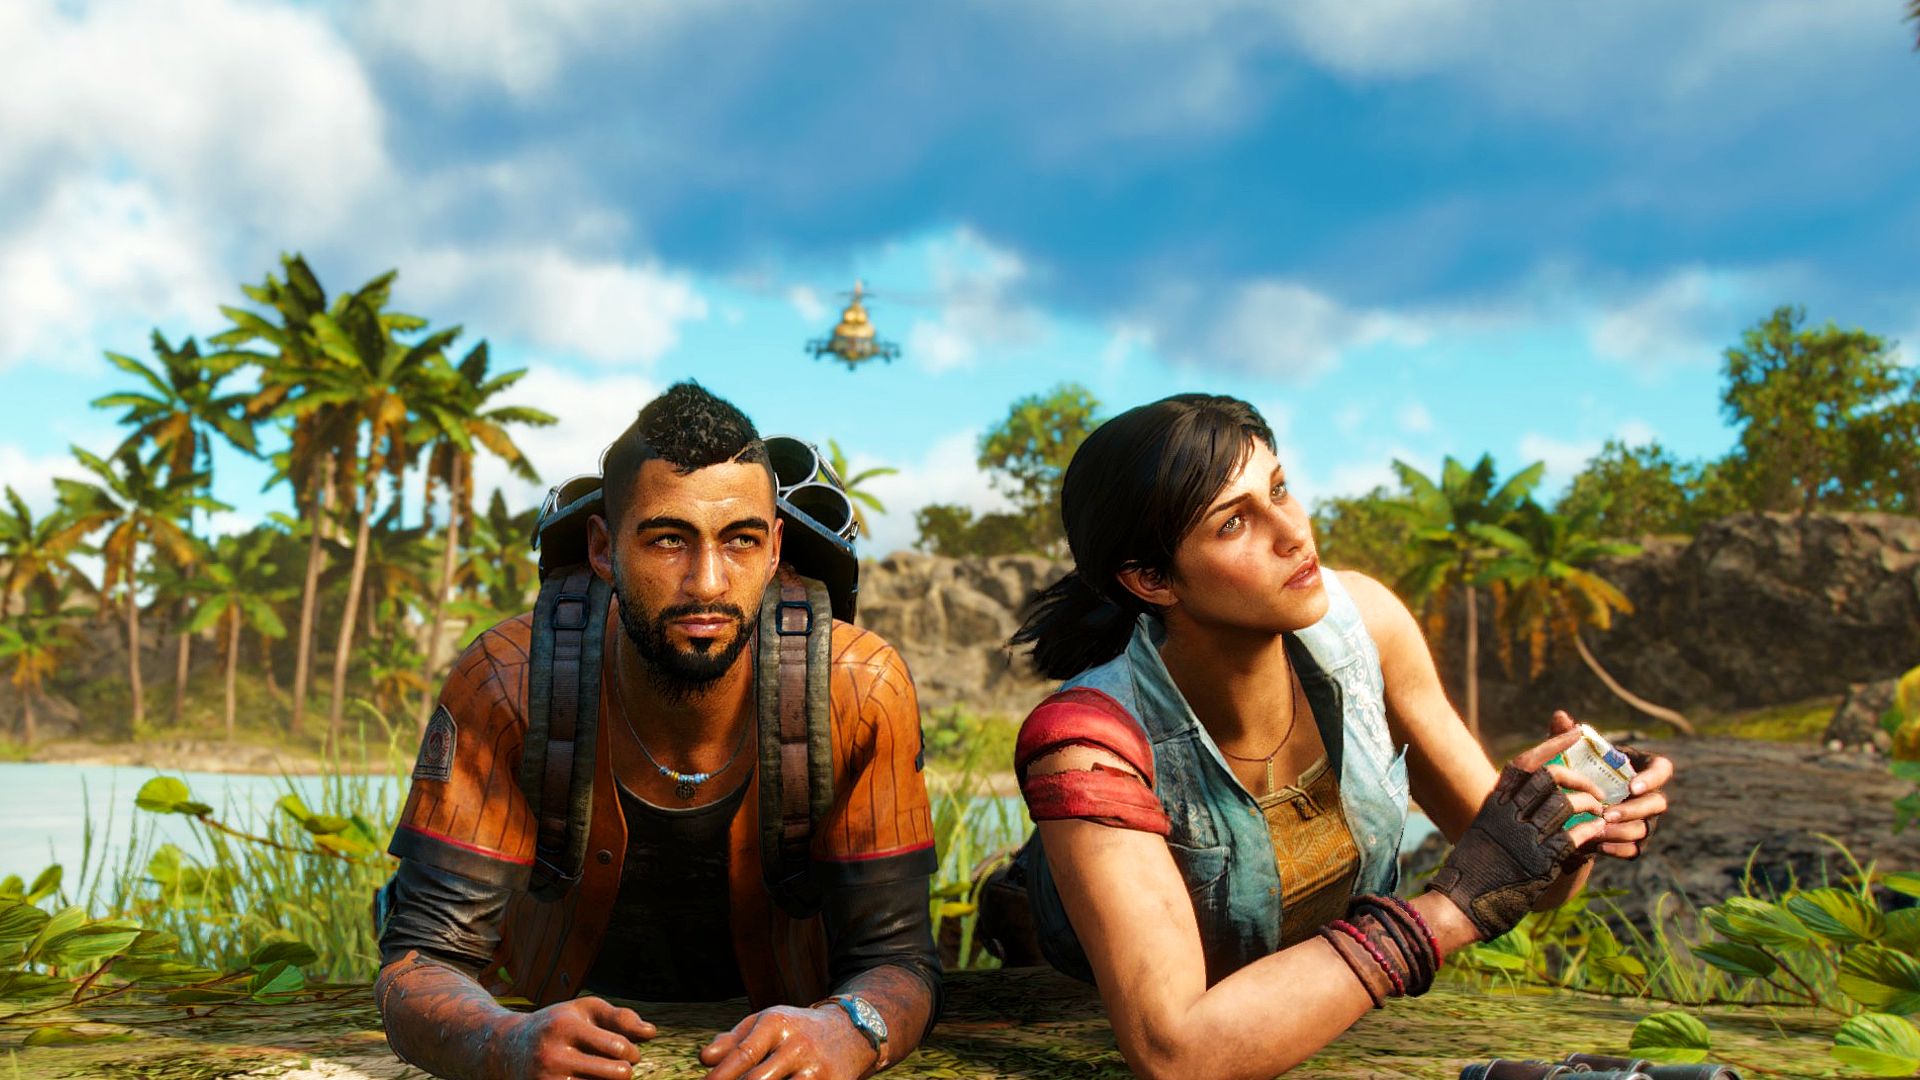 Far Cry 6' and the impossibility of 'fun' politics in video games